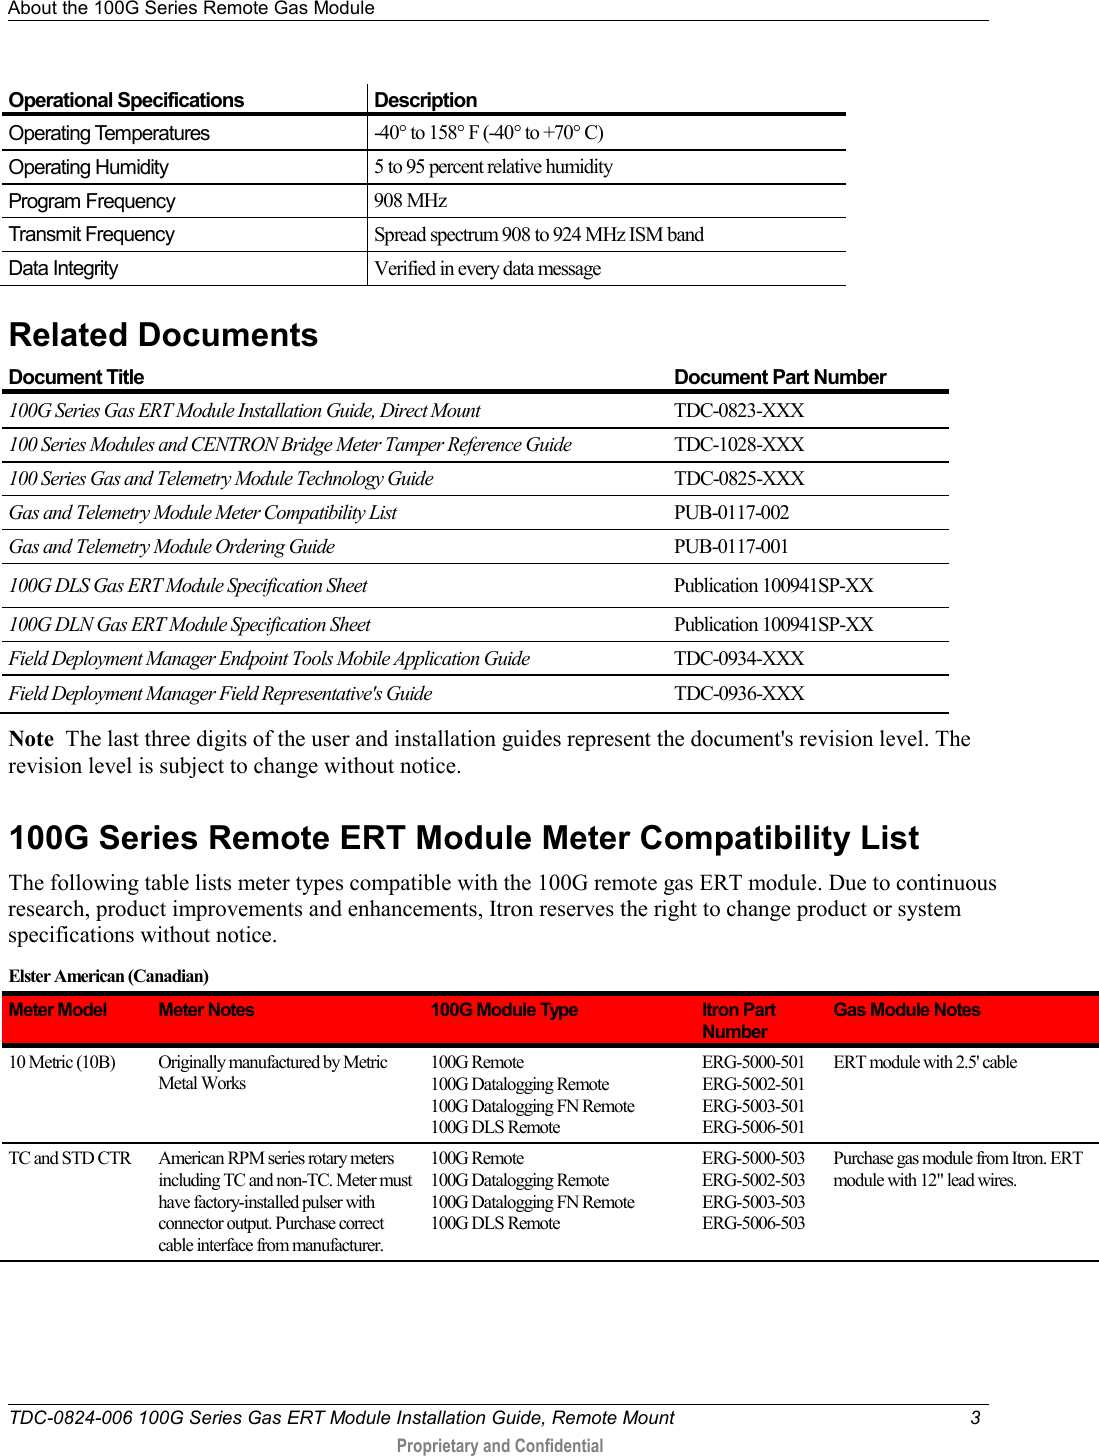 About the 100G Series Remote Gas Module   TDC-0824-006 100G Series Gas ERT Module Installation Guide, Remote Mount  3   Proprietary and Confidential     Operational Specifications Description Operating Temperatures -40° to 158° F (-40° to +70° C) Operating Humidity 5 to 95 percent relative humidity Program Frequency 908 MHz Transmit Frequency Spread spectrum 908 to 924 MHz ISM band Data Integrity Verified in every data message  Related Documents  Document Title Document Part Number 100G Series Gas ERT Module Installation Guide, Direct Mount TDC-0823-XXX 100 Series Modules and CENTRON Bridge Meter Tamper Reference Guide TDC-1028-XXX 100 Series Gas and Telemetry Module Technology Guide TDC-0825-XXX Gas and Telemetry Module Meter Compatibility List PUB-0117-002 Gas and Telemetry Module Ordering Guide PUB-0117-001 100G DLS Gas ERT Module Specification Sheet Publication 100941SP-XX 100G DLN Gas ERT Module Specification Sheet Publication 100941SP-XX Field Deployment Manager Endpoint Tools Mobile Application Guide TDC-0934-XXX Field Deployment Manager Field Representative&apos;s Guide TDC-0936-XXX Note  The last three digits of the user and installation guides represent the document&apos;s revision level. The revision level is subject to change without notice.  100G Series Remote ERT Module Meter Compatibility List The following table lists meter types compatible with the 100G remote gas ERT module. Due to continuous research, product improvements and enhancements, Itron reserves the right to change product or system specifications without notice.  Elster American (Canadian) Meter Model Meter Notes 100G Module Type Itron Part Number Gas Module Notes 10 Metric (10B) Originally manufactured by Metric Metal Works 100G Remote 100G Datalogging Remote 100G Datalogging FN Remote 100G DLS Remote ERG-5000-501 ERG-5002-501 ERG-5003-501 ERG-5006-501 ERT module with 2.5&apos; cable TC and STD CTR American RPM series rotary meters including TC and non-TC. Meter must have factory-installed pulser with connector output. Purchase correct cable interface from manufacturer. 100G Remote 100G Datalogging Remote 100G Datalogging FN Remote 100G DLS Remote ERG-5000-503 ERG-5002-503 ERG-5003-503 ERG-5006-503 Purchase gas module from Itron. ERT module with 12&quot; lead wires.     